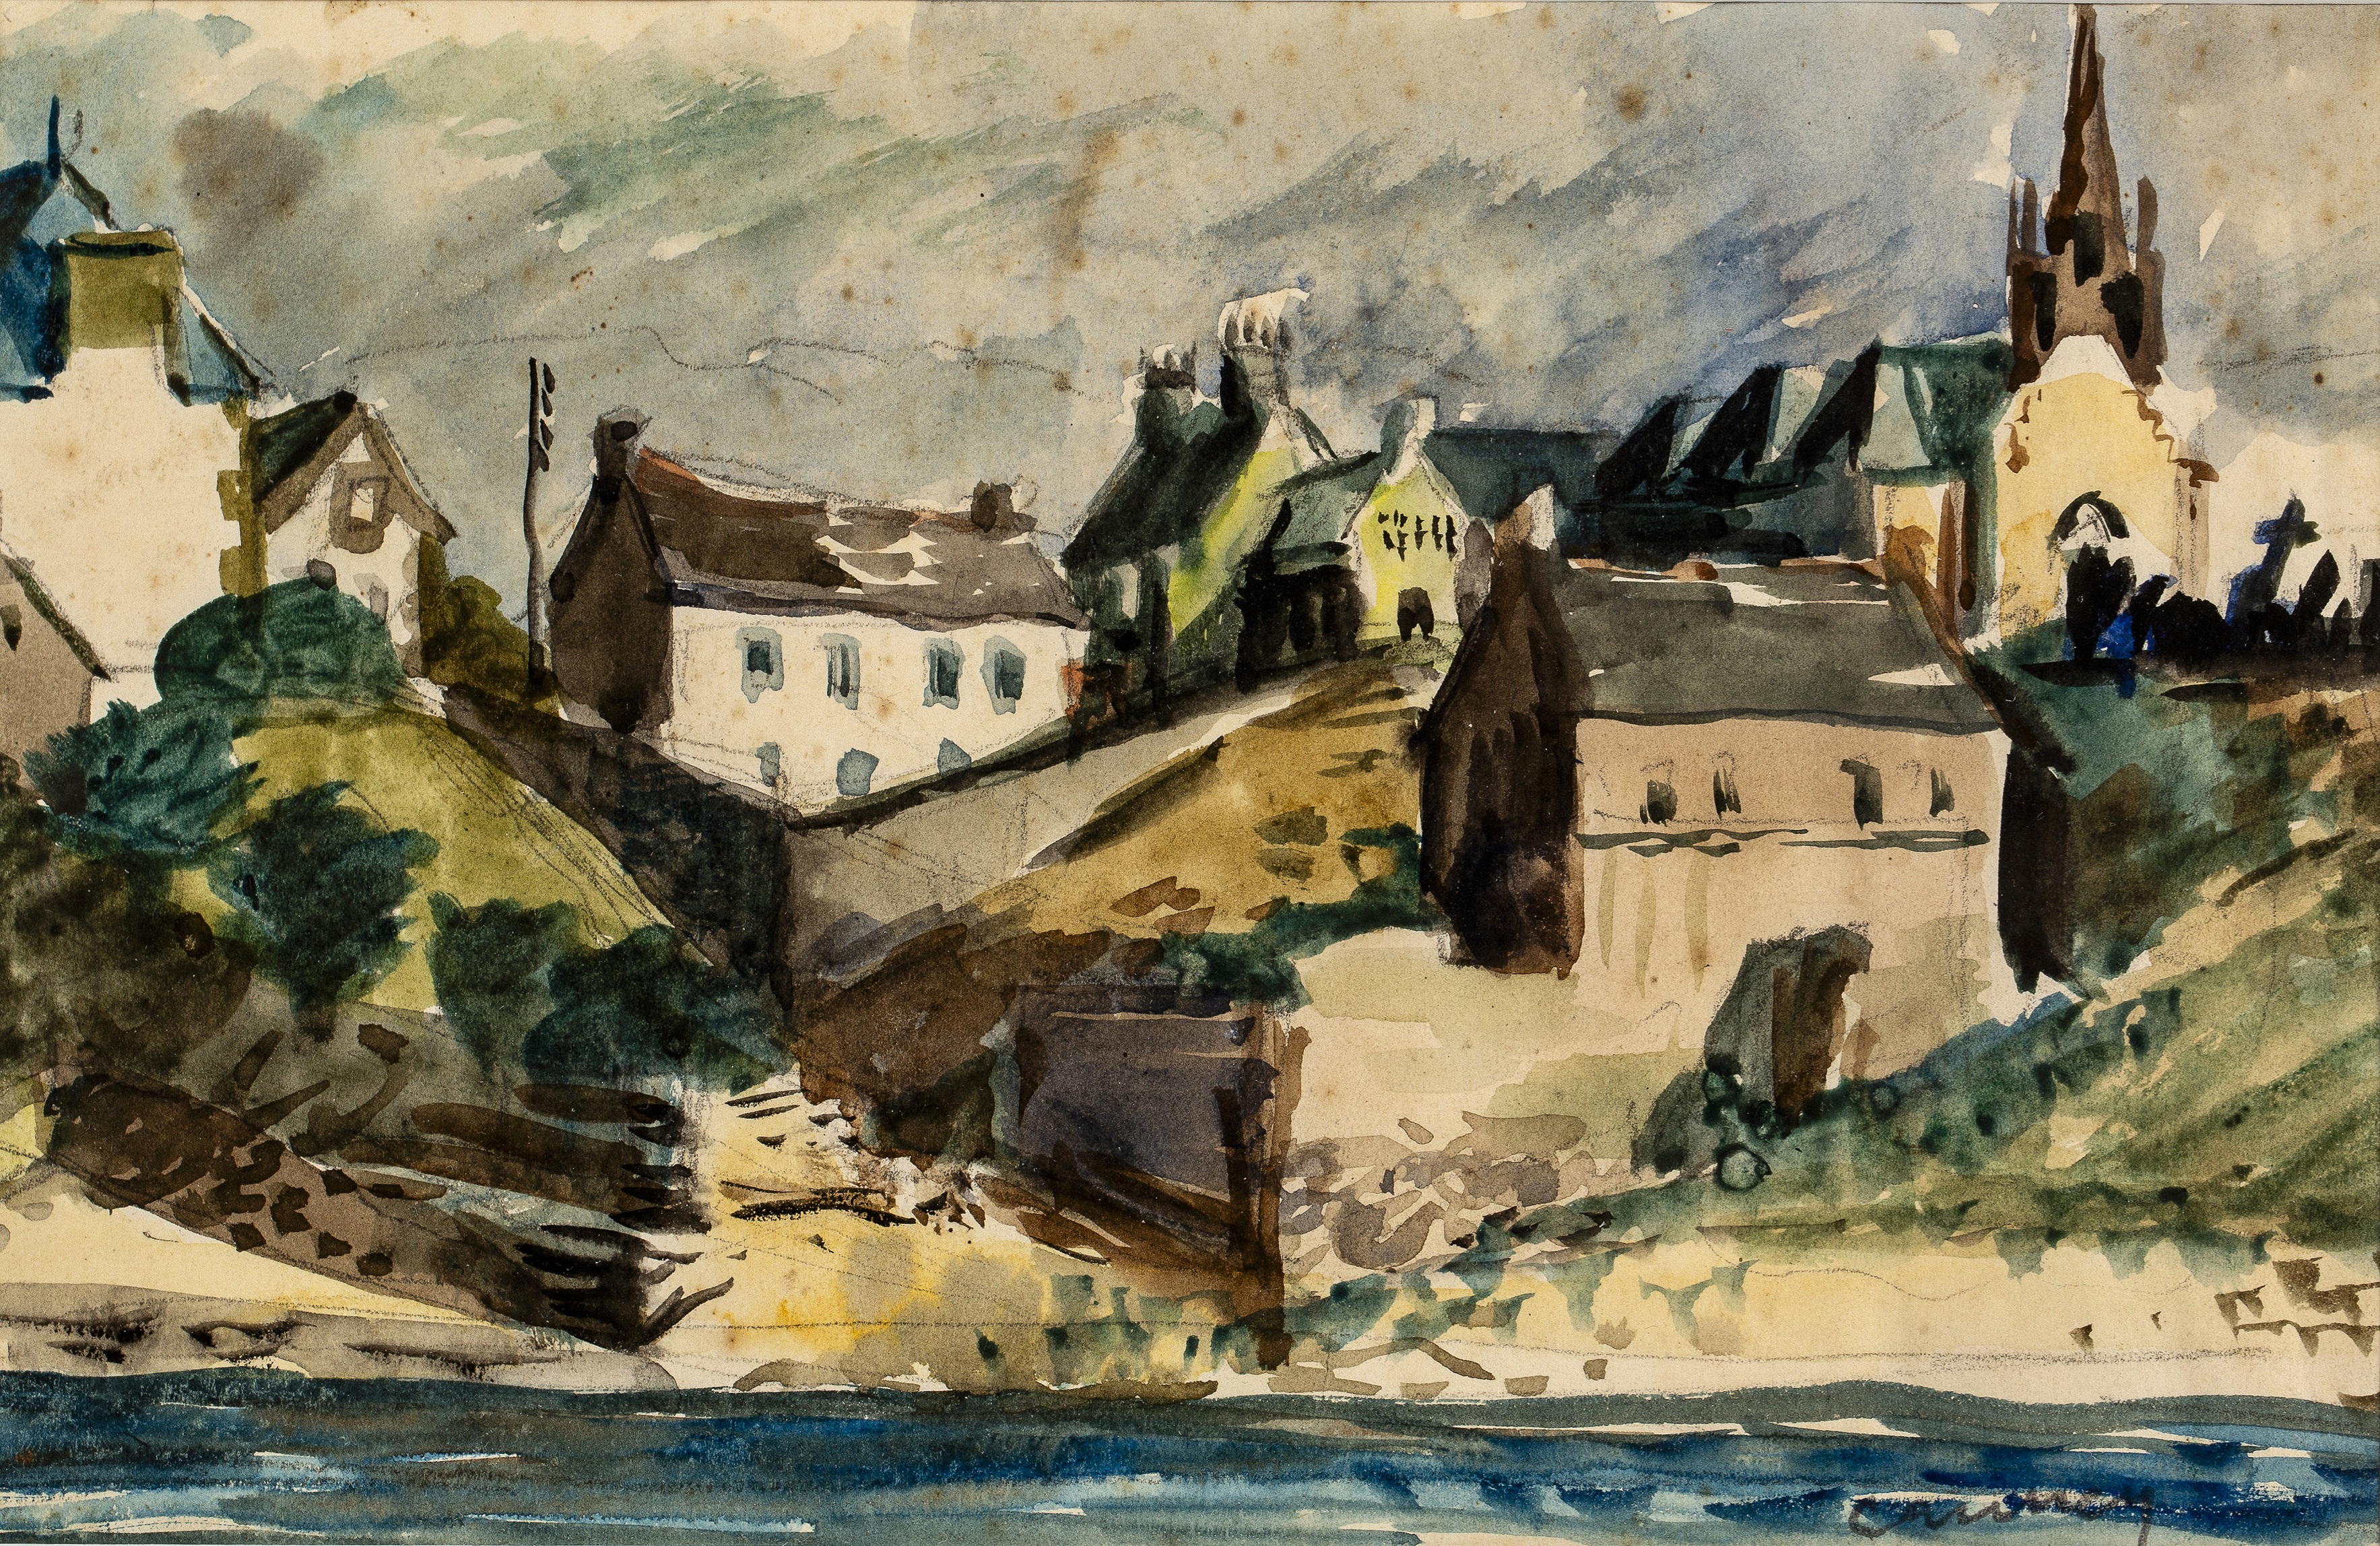 Michael Canney (1923-1999) Cornish Village signed in pencil (lower right) watercolour 16 x 25cm.